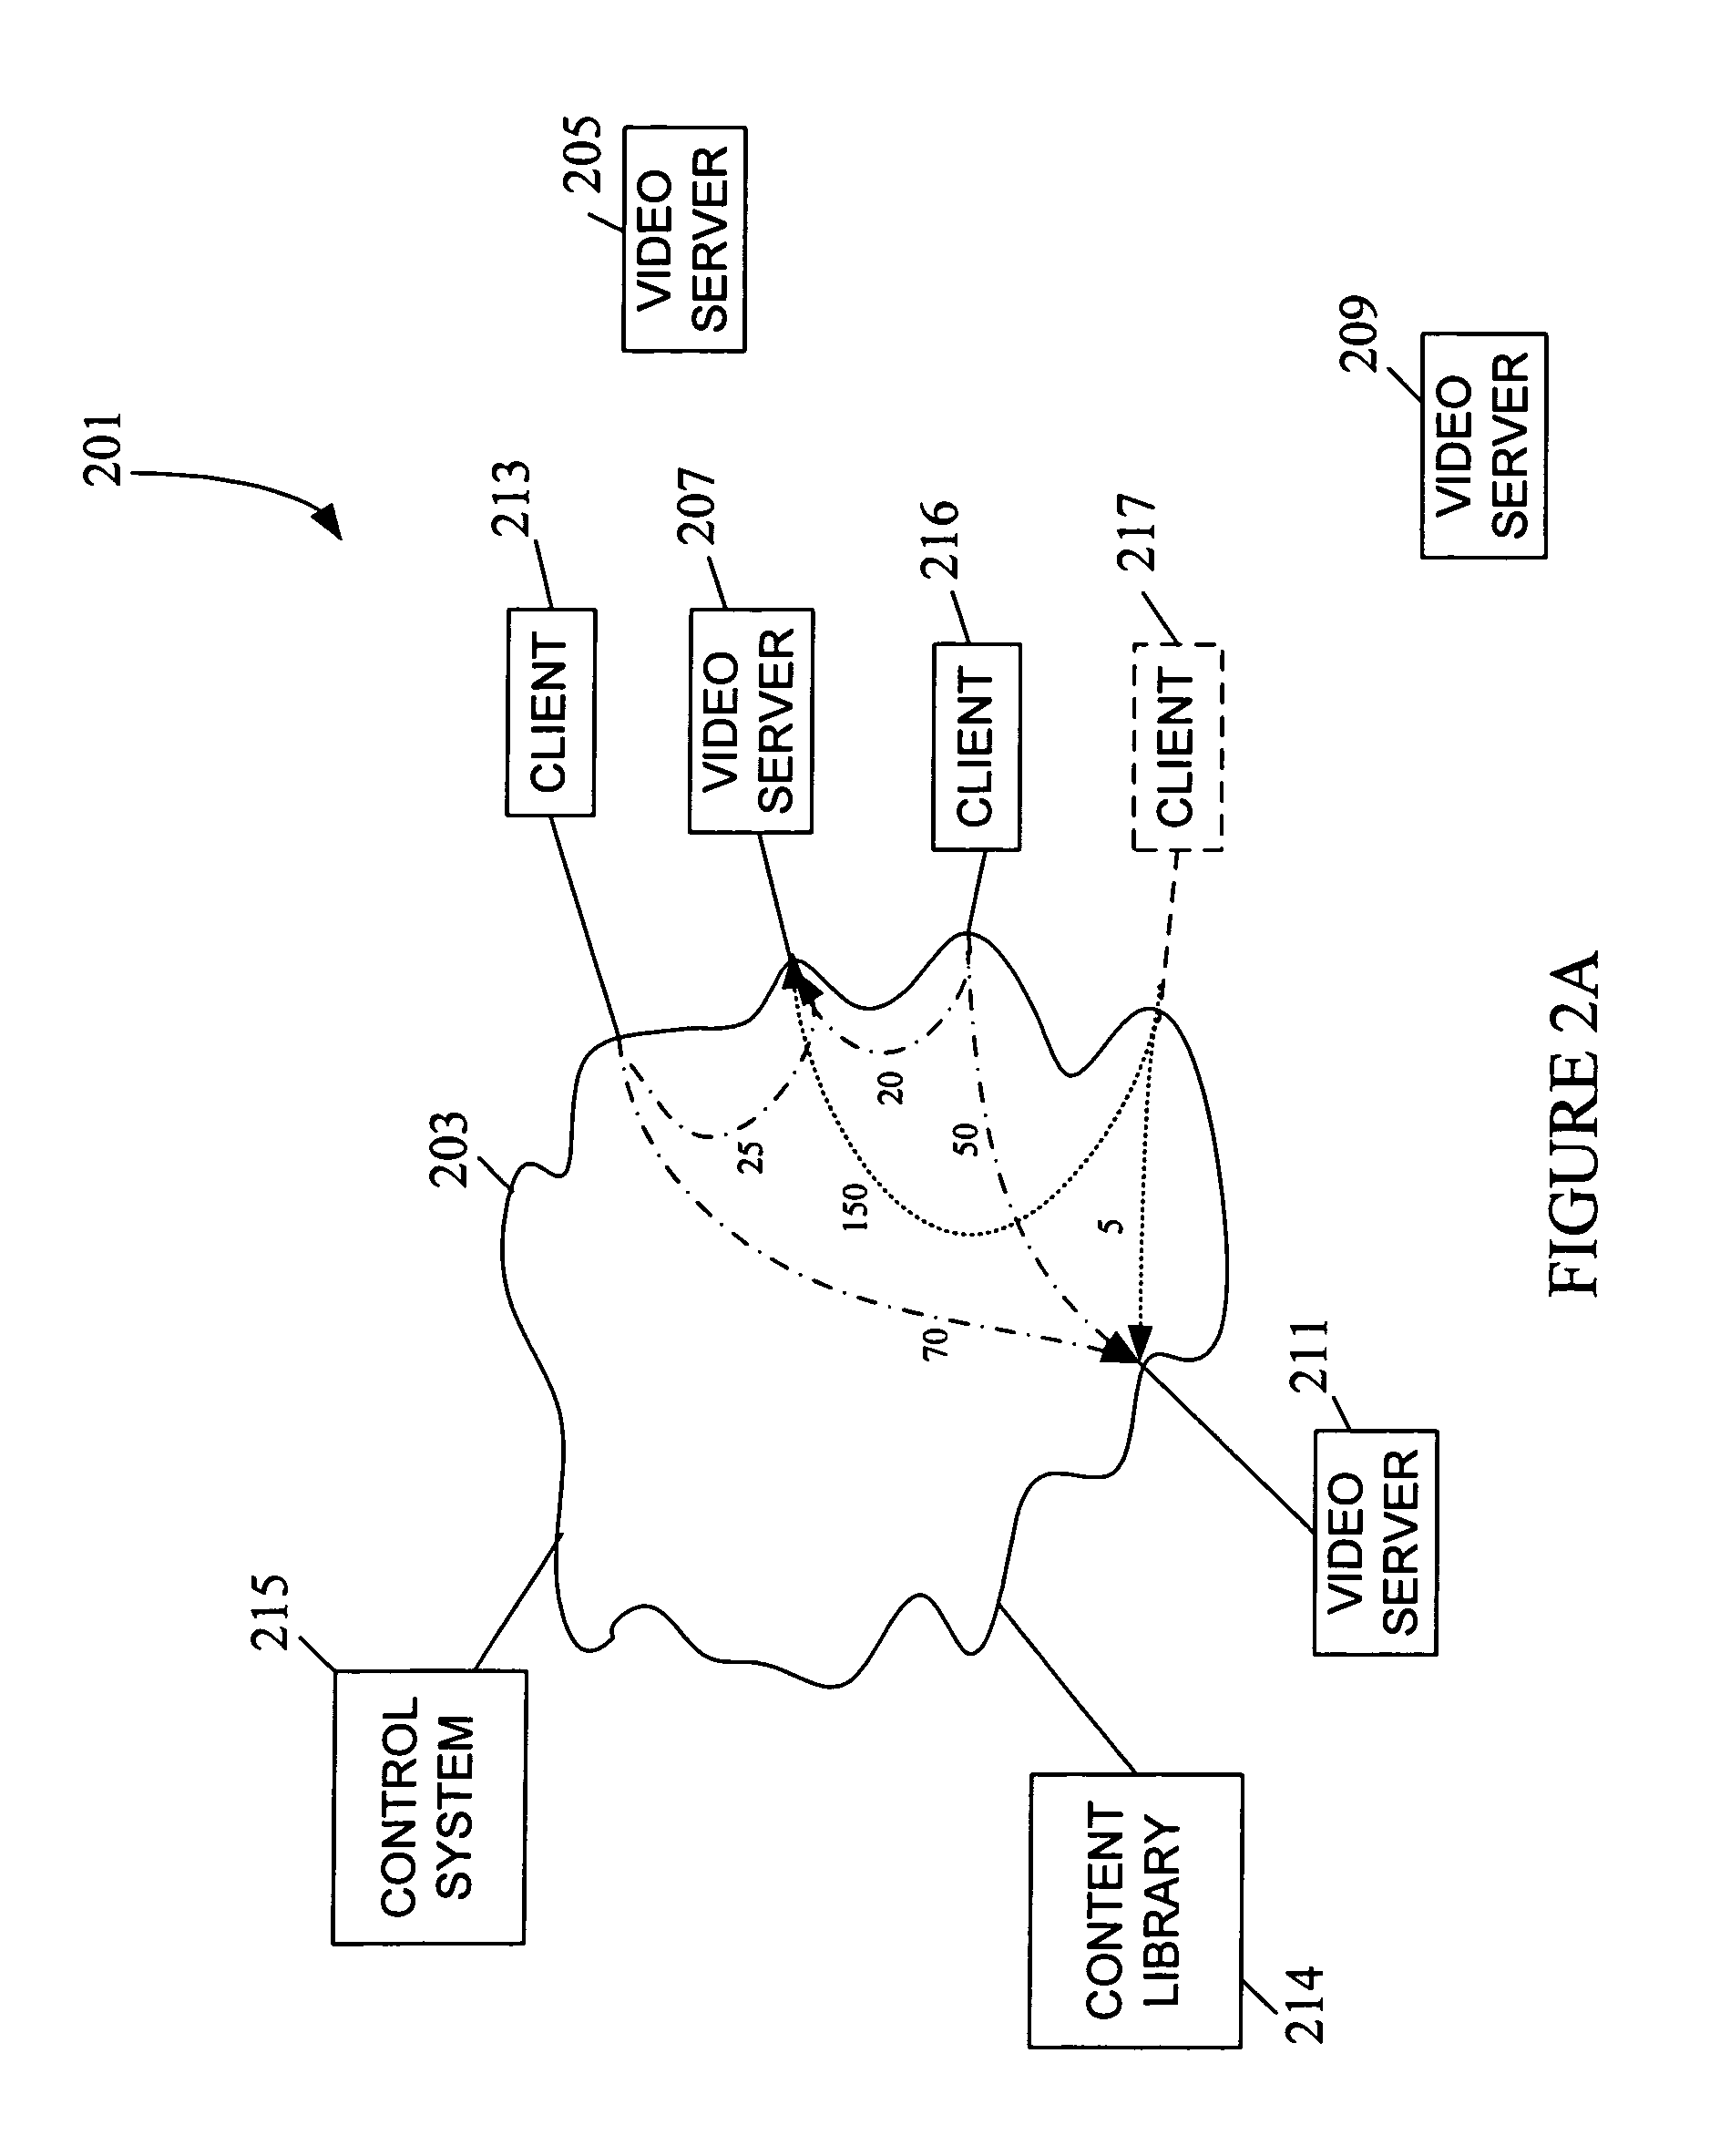 Proximity as an aid to caching and secondary serving of data